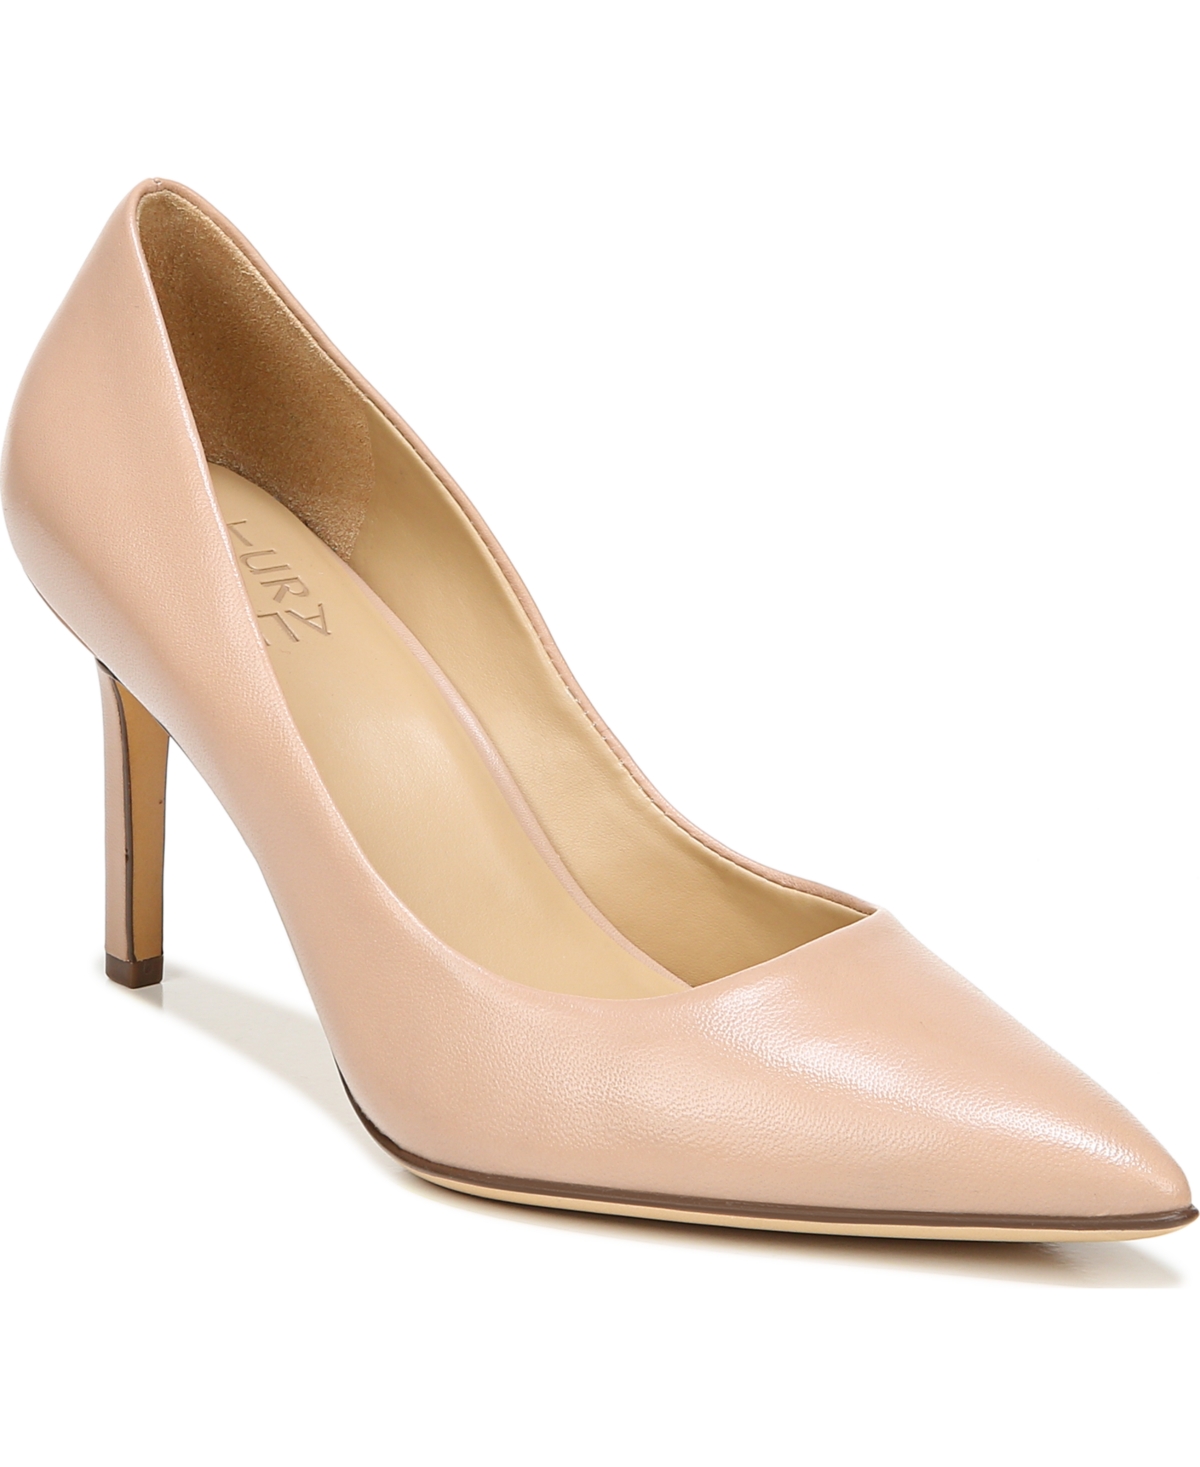 Anna Pumps - Creme Brulee Leather